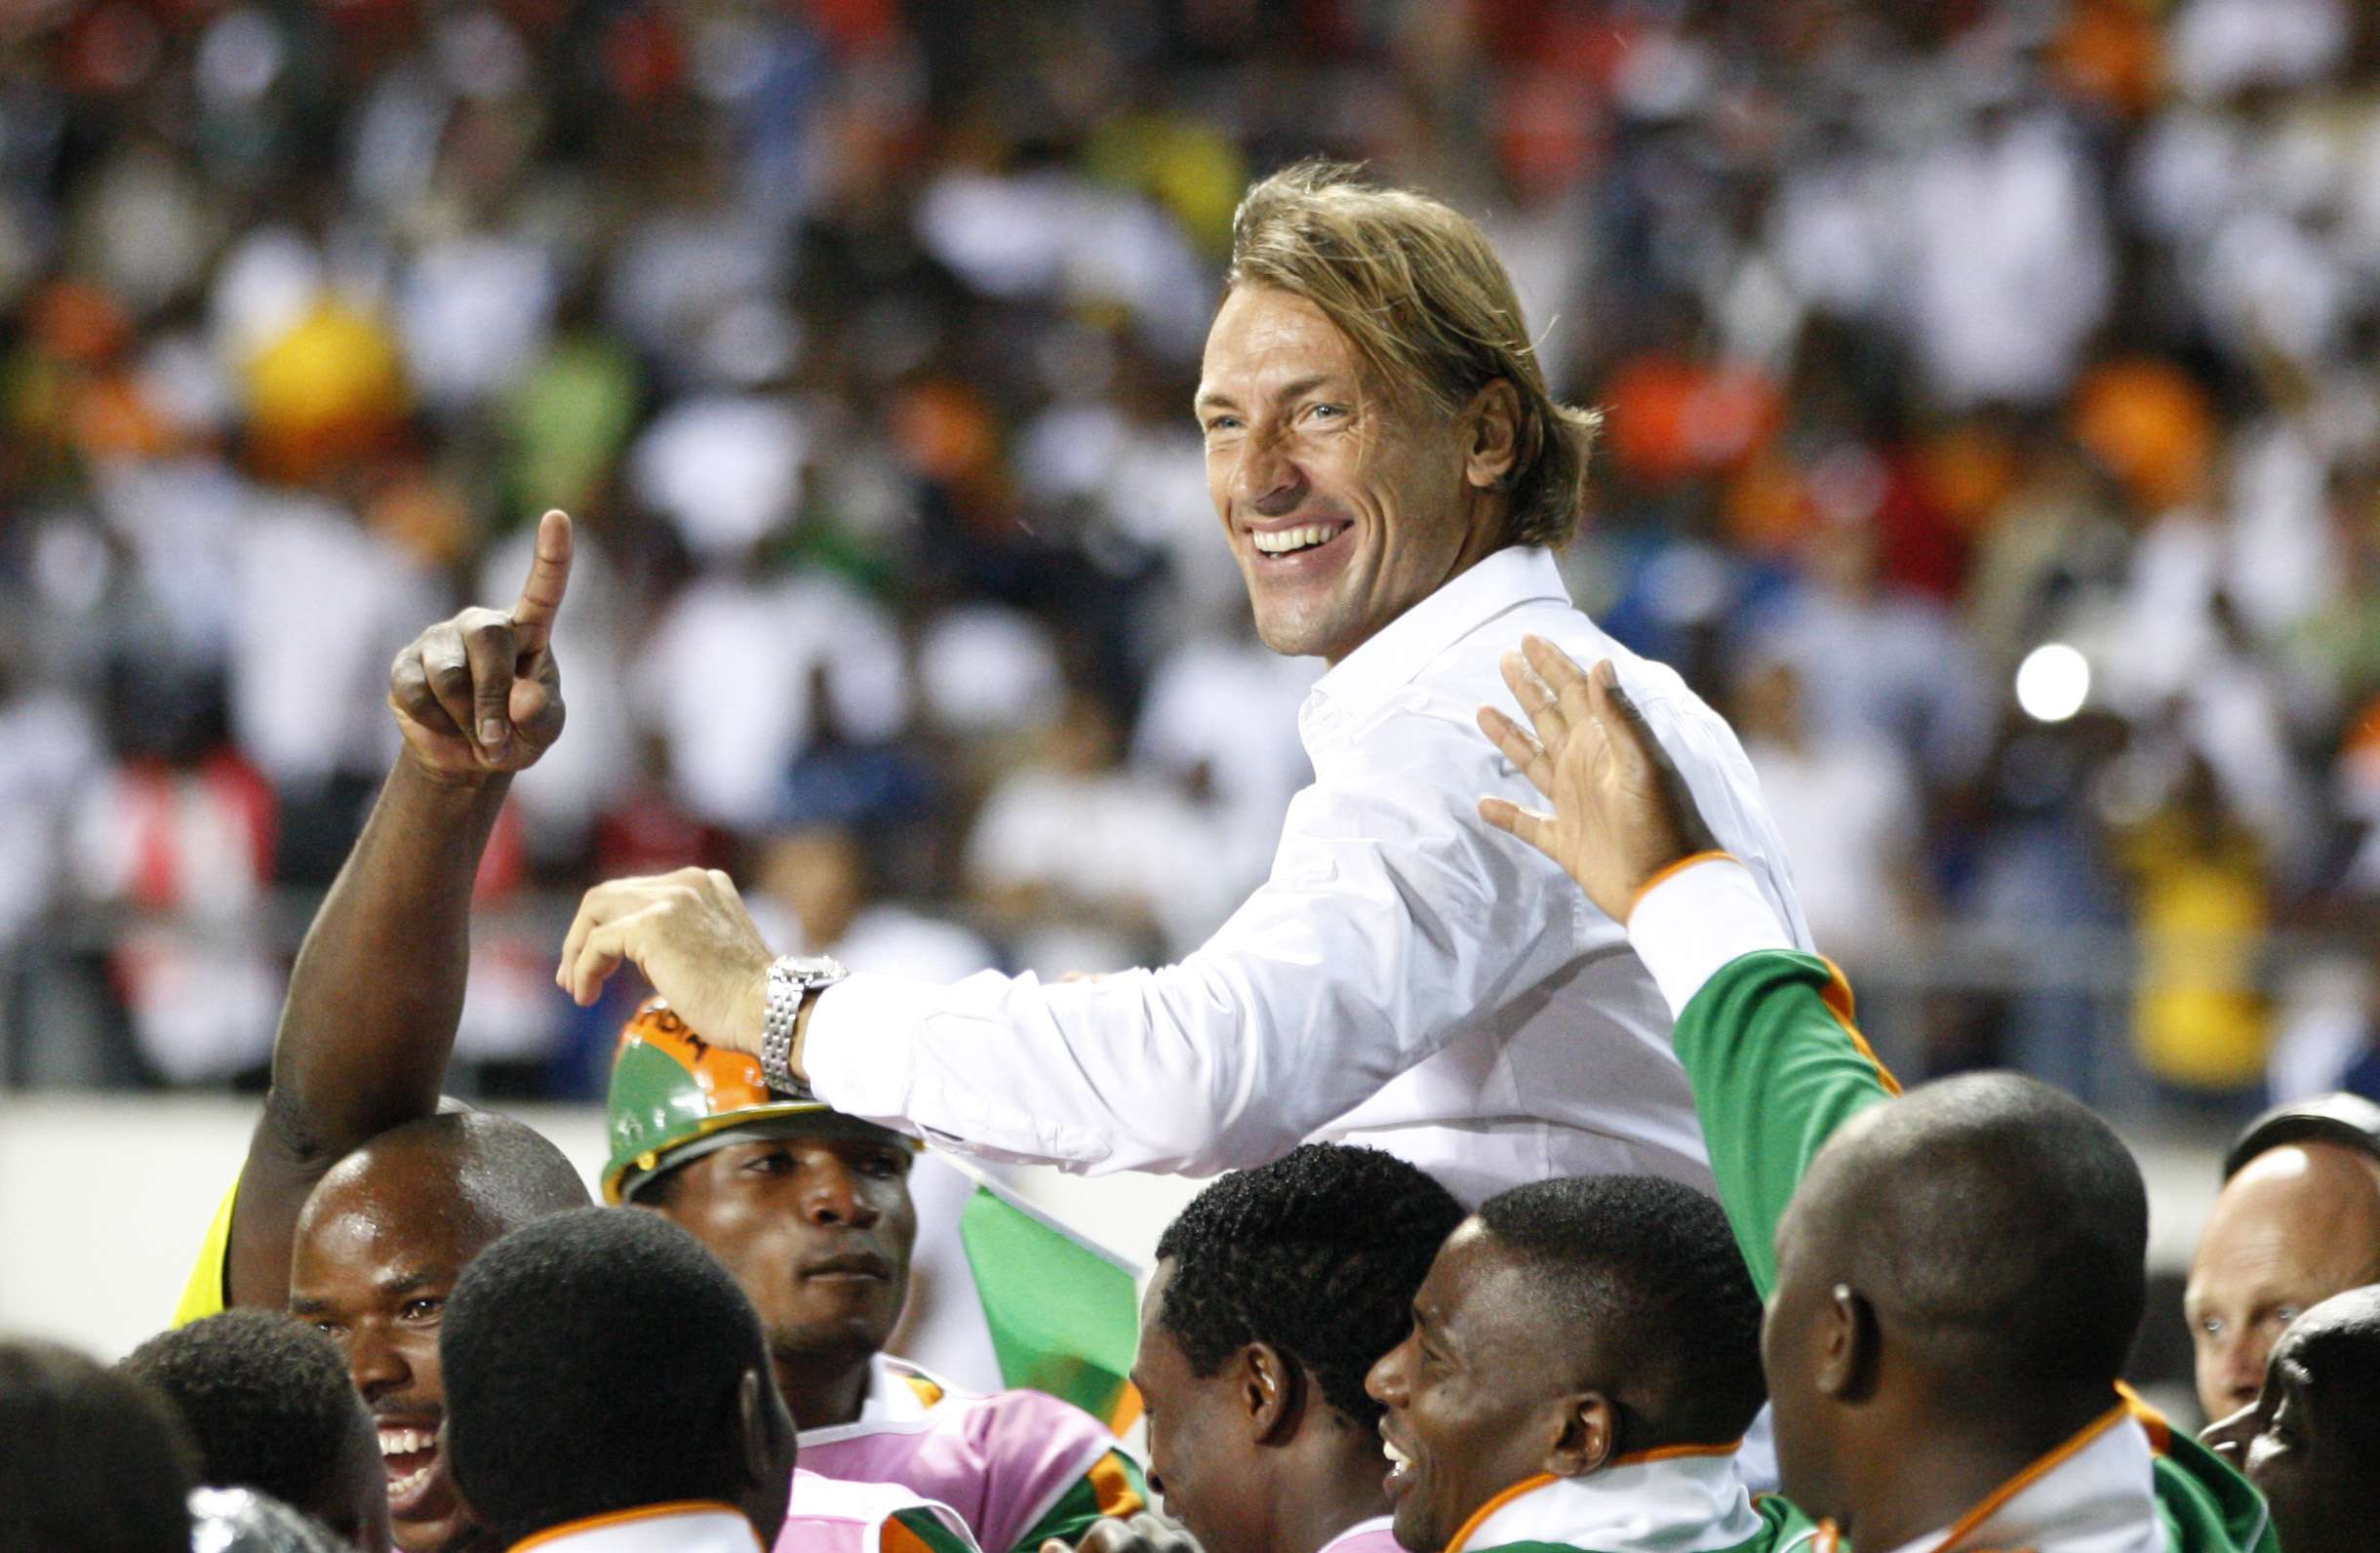 Herve Renard led Zambia to the Africa Cup of Nations title with a surprise win over Ivory Coast back in 2012, the last time Gabon hosted the tournament. Photo: AP